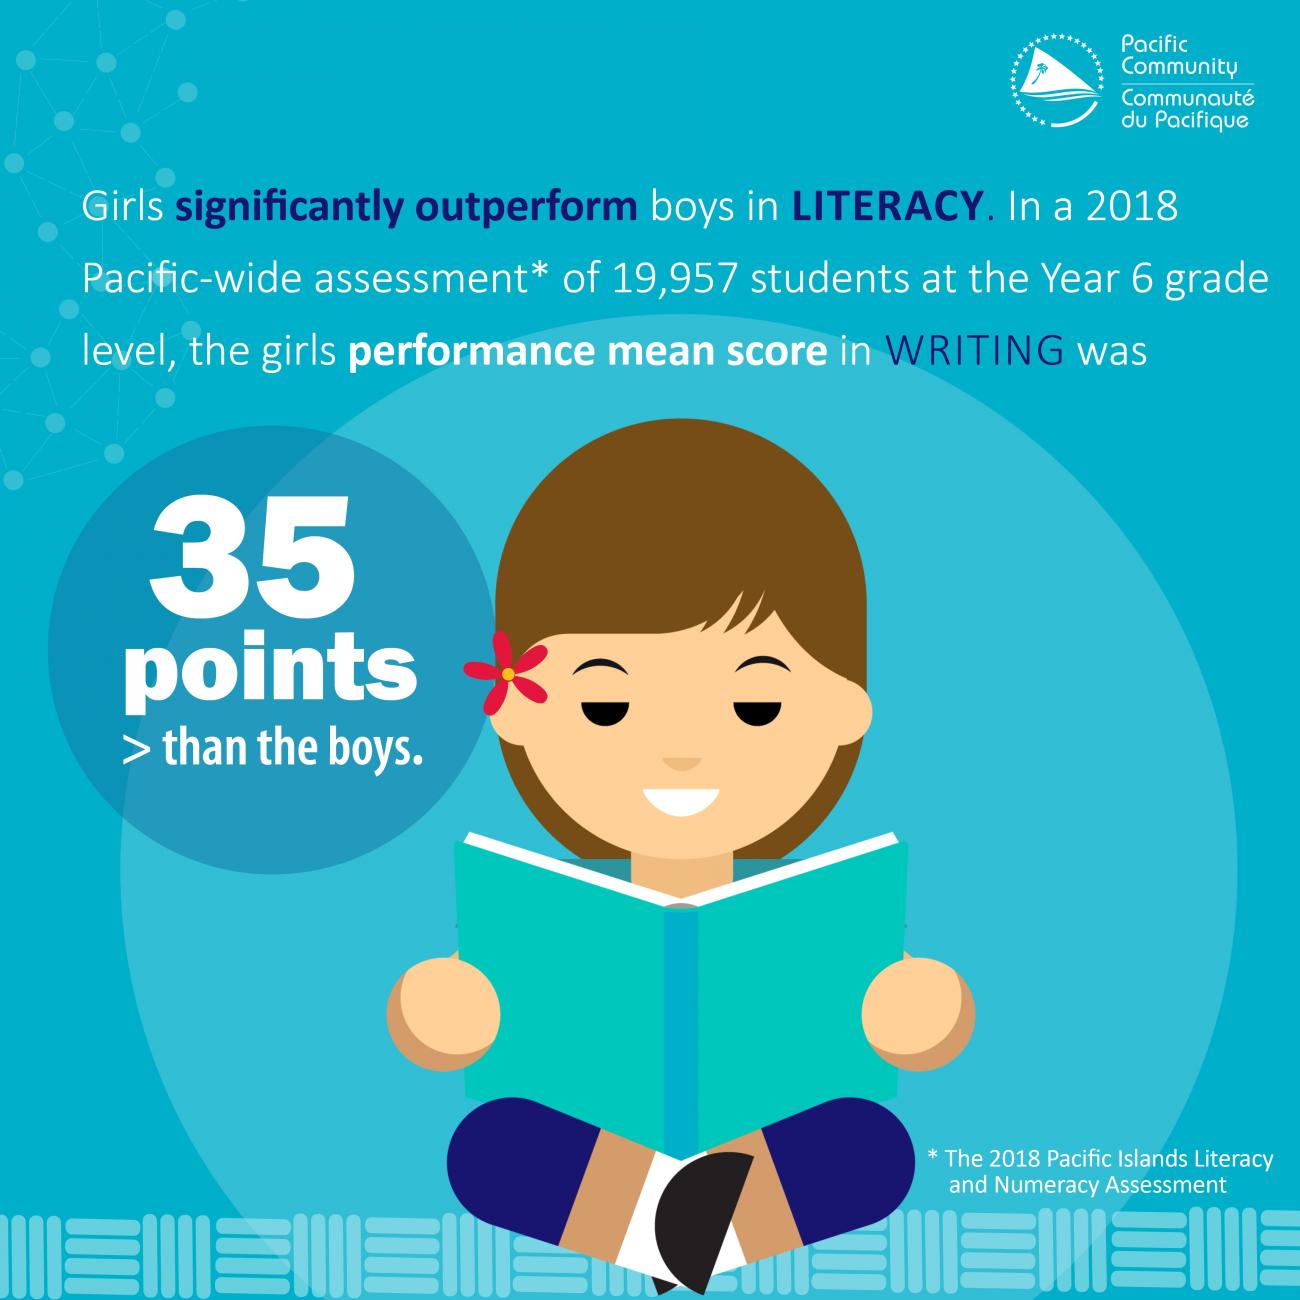 Girls significantly outperform boys in literacy. In a 2018 Pacific-wide assessment* of 19,957 students at the Year 6 grade level, the girls' performance mean score in writing was 35 points greater than the boys. #EQAP #PacificEducation